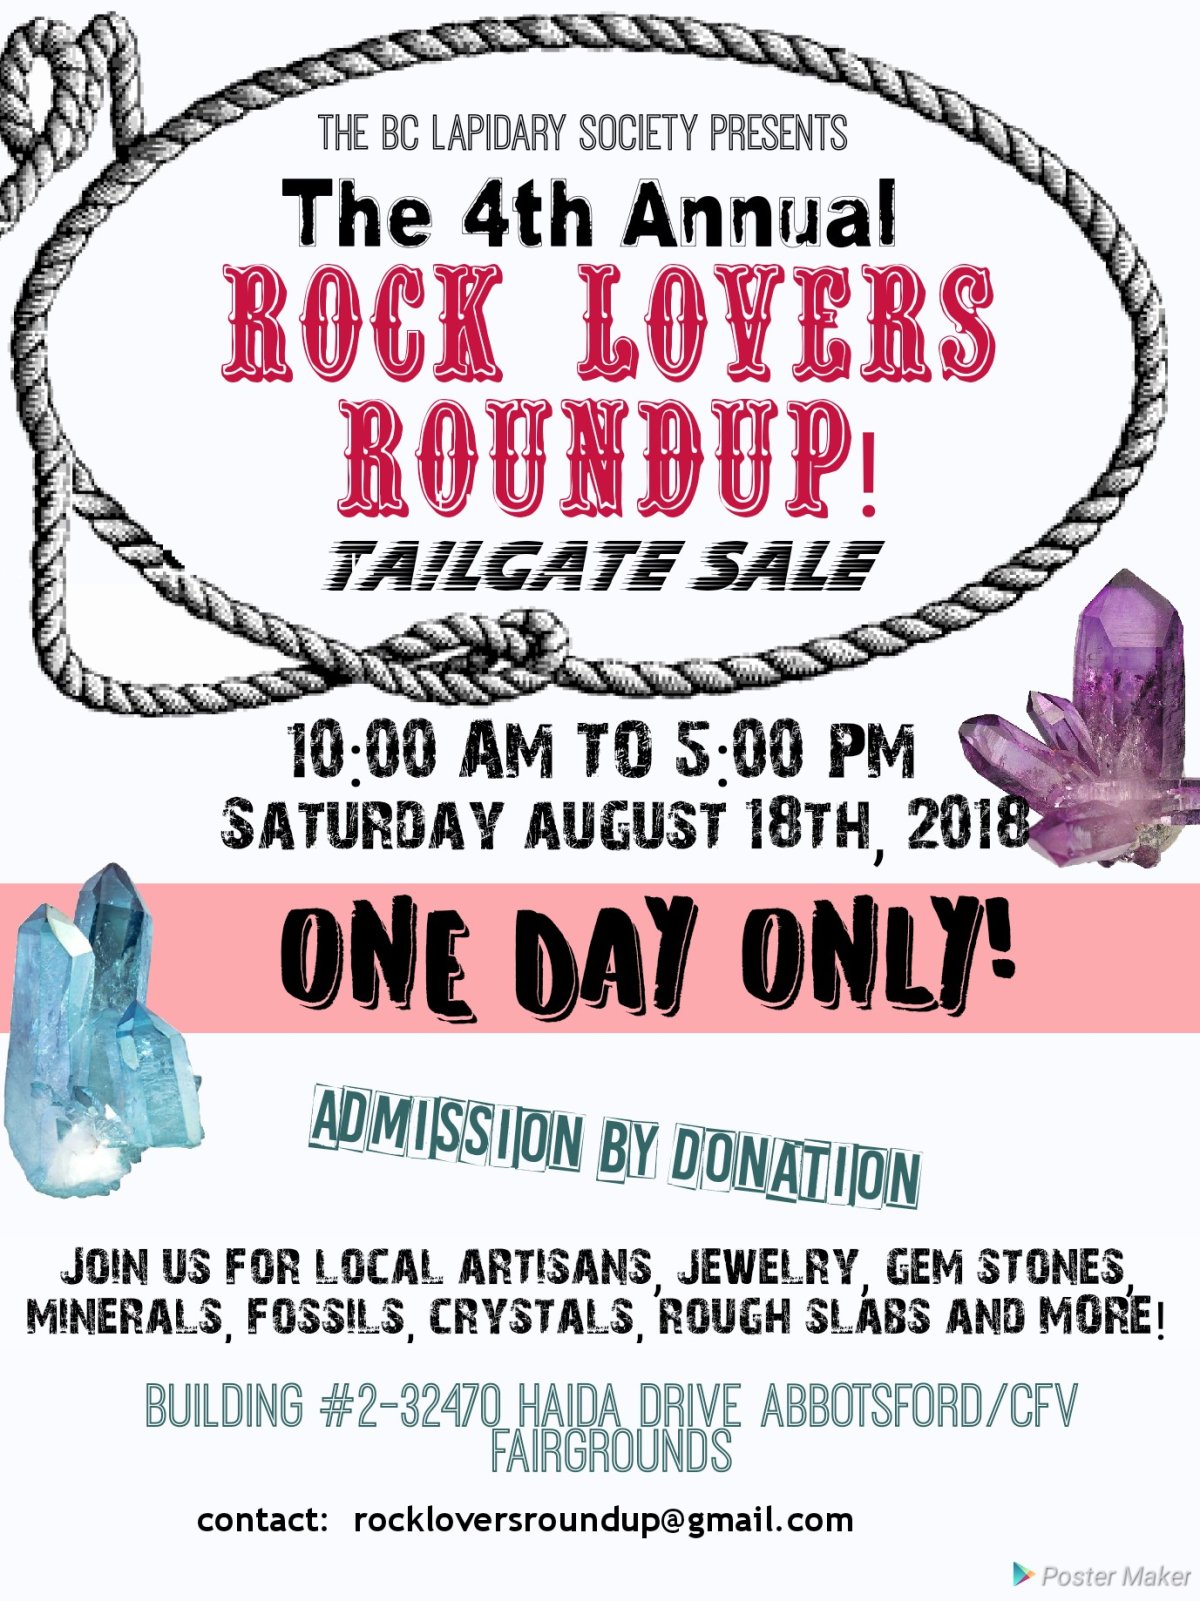 Rock Lovers Roundup Tailgate Sale - image